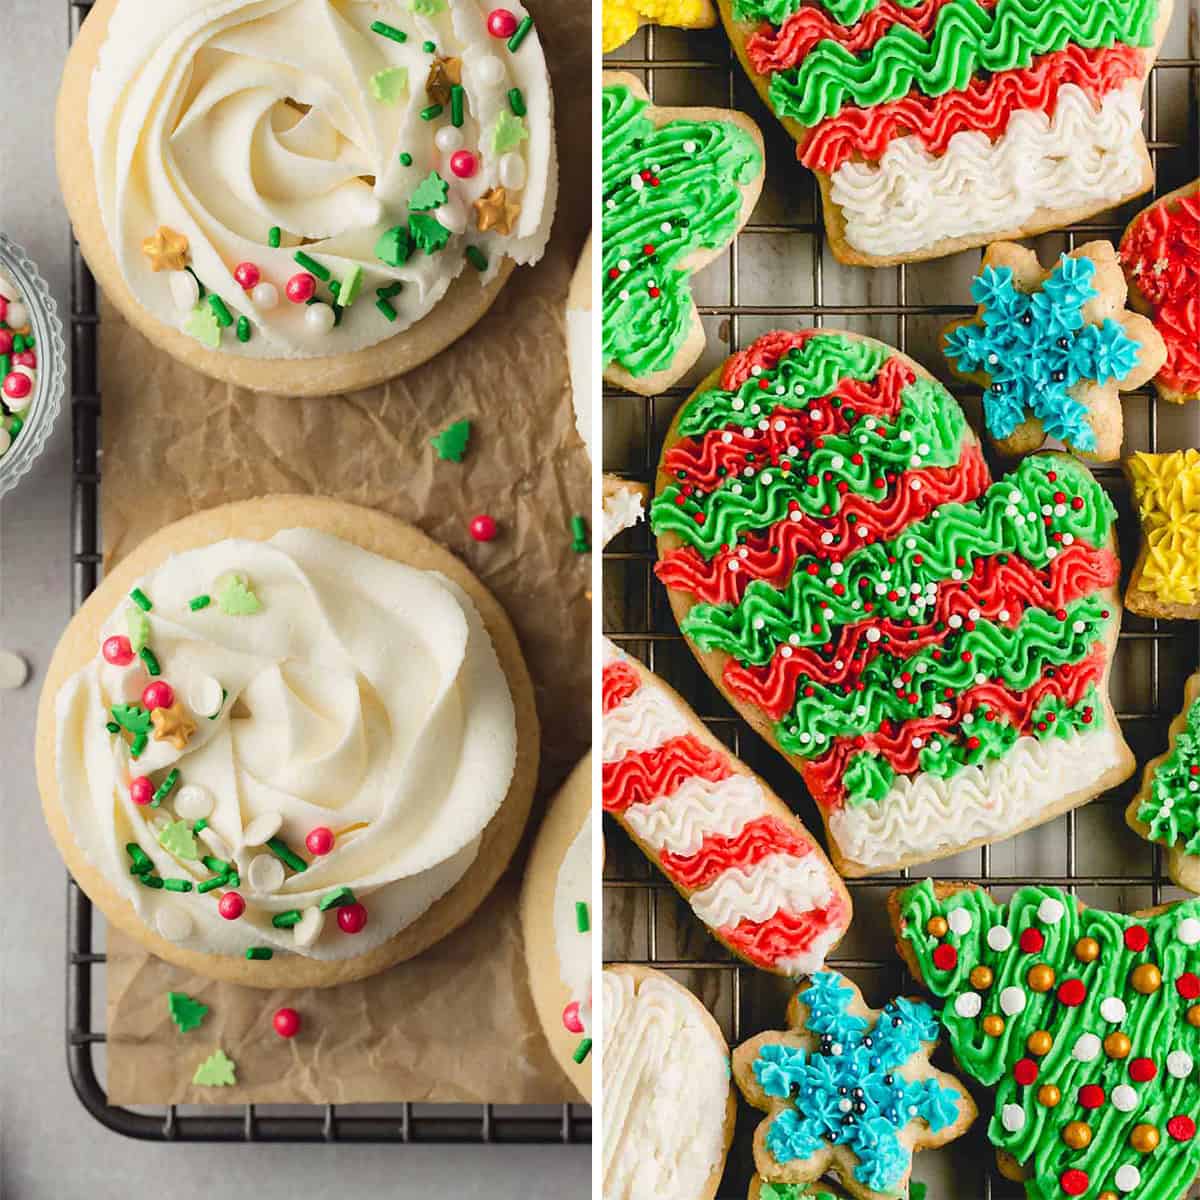 Sugar cookies with frosting piped with a 1M tip versus a small star tip.